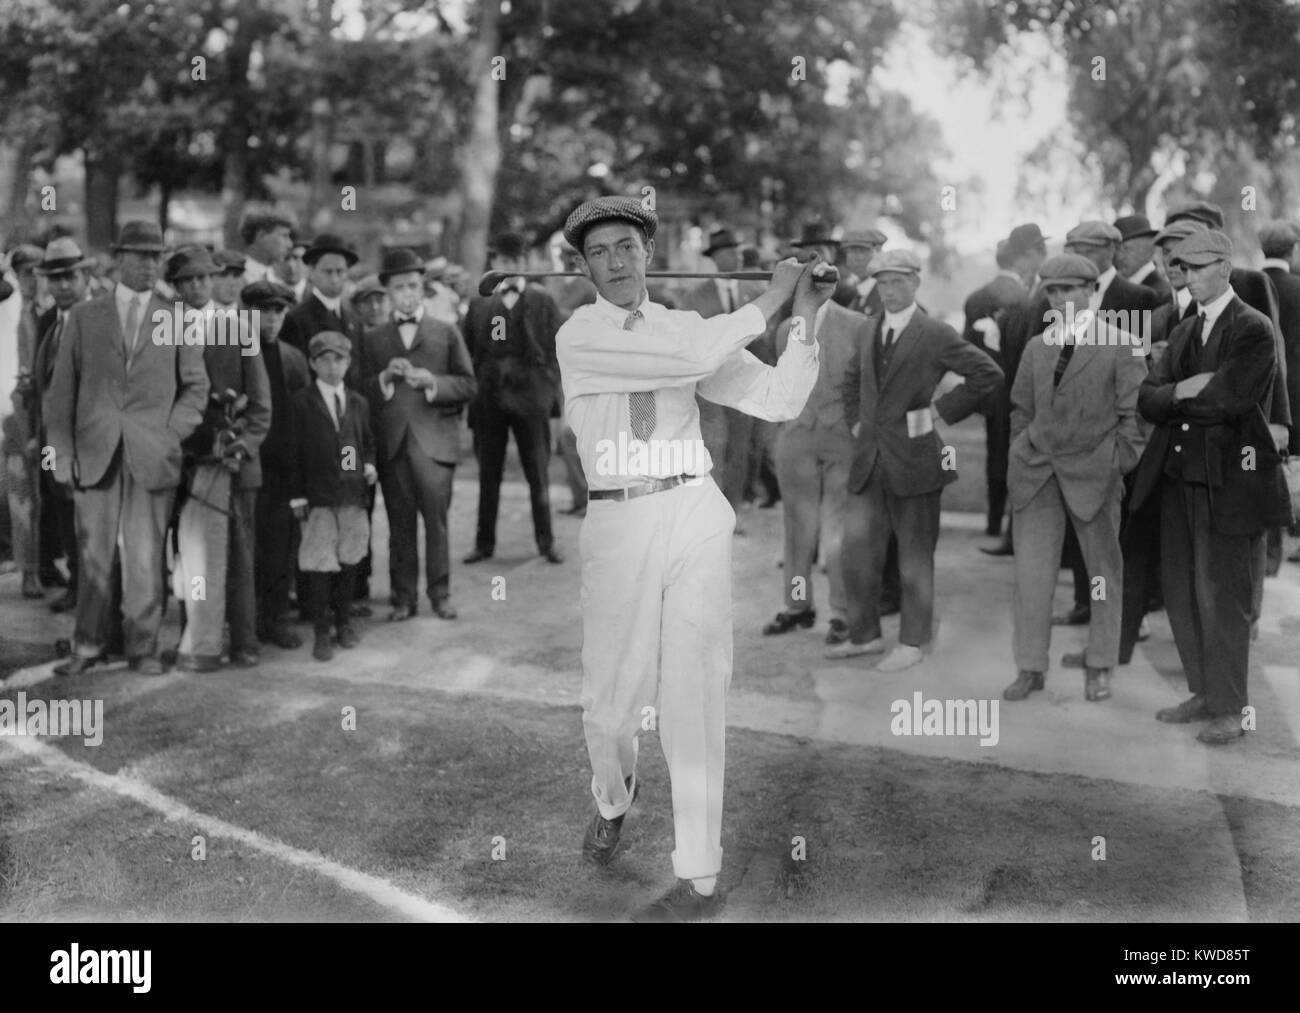 American golfer Francis DeSales Ouimet at the 1913 U.S. Open in Brookline, MA. Ouimet, a 20 year old amateur won the U.S. Open title in an 18-hole playoff, with five strokes ahead of Britons Harry Vardon and Ted Ray. Sept. 18–20, 1913. Matthew Knight played Ouimet in the 2005 film about the 1913 U.S. Open, THE GREATEST GAME EVER PLAYED. (BSLOC 2015 17 111) Stock Photo